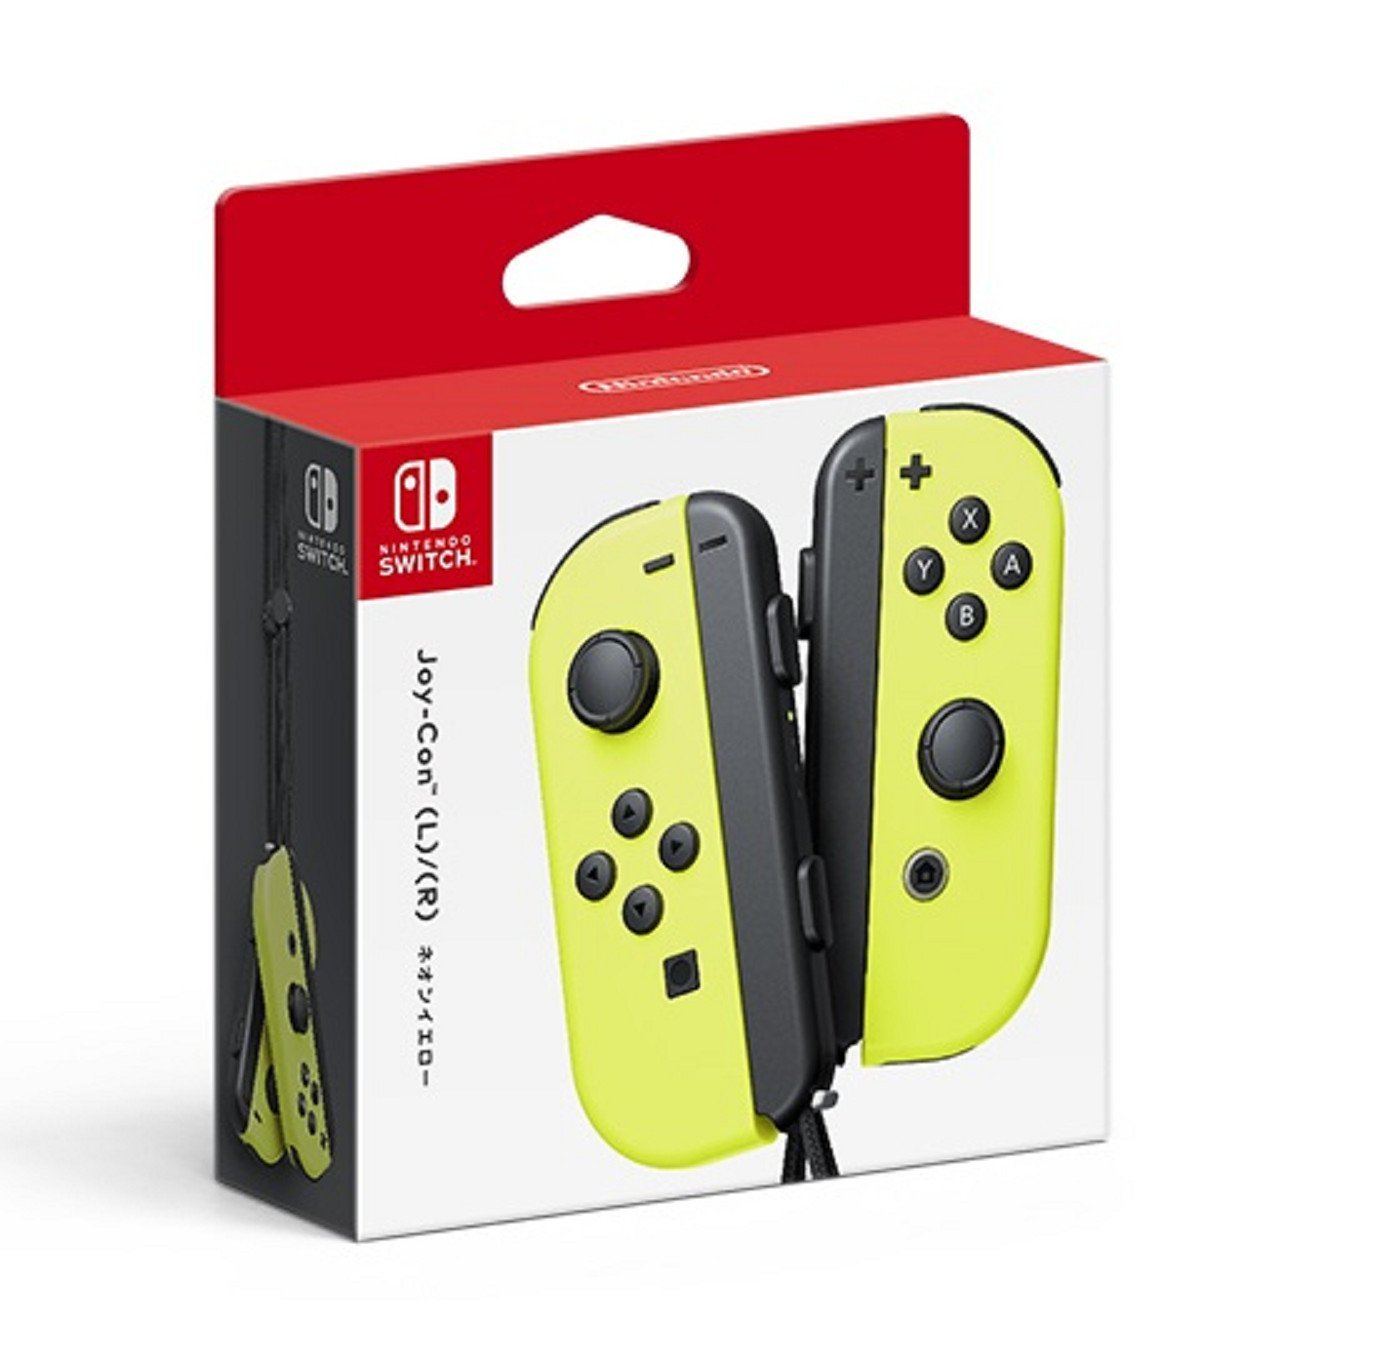 Nintendo Switch Joy-Con Controllers (Neon Yellow) for Nintendo Switch